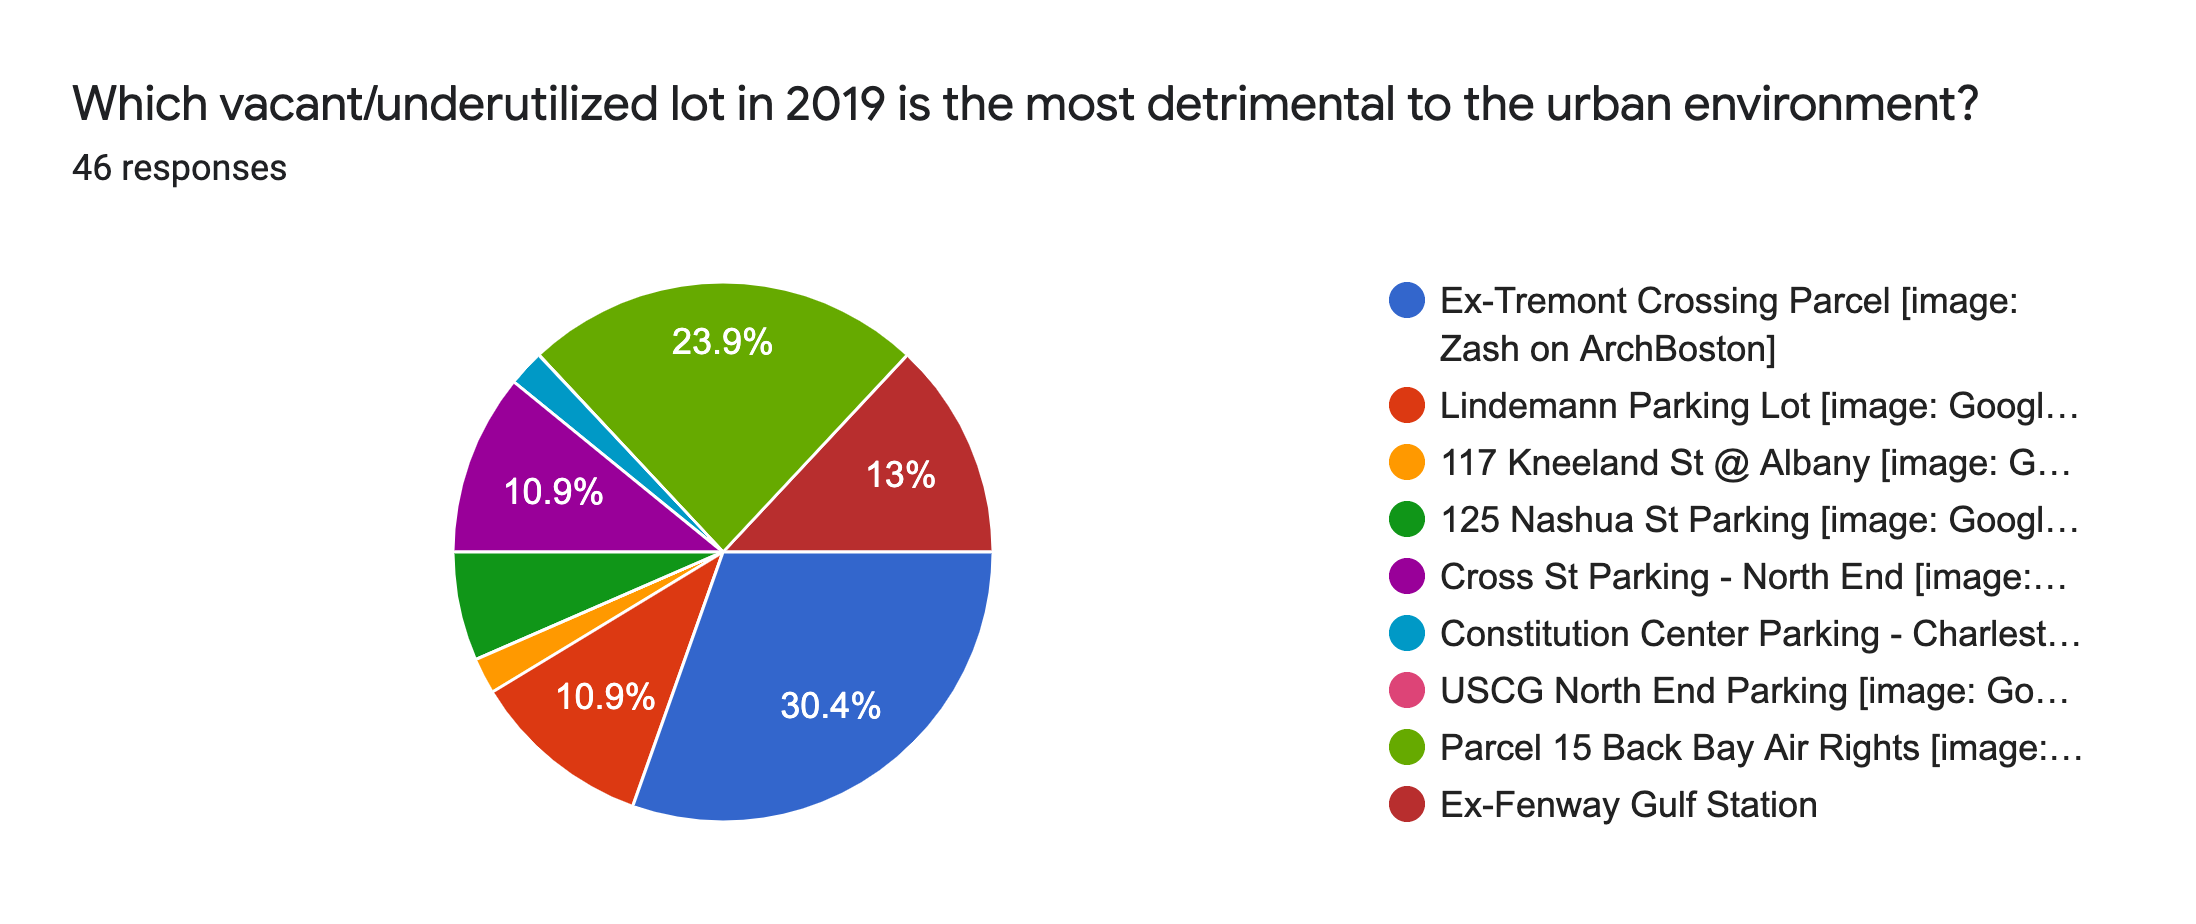 Forms response chart. Question title: Which vacant/underutilized lot in 2019 is the most detrimental to the urban environment?. Number of responses: 46 responses.